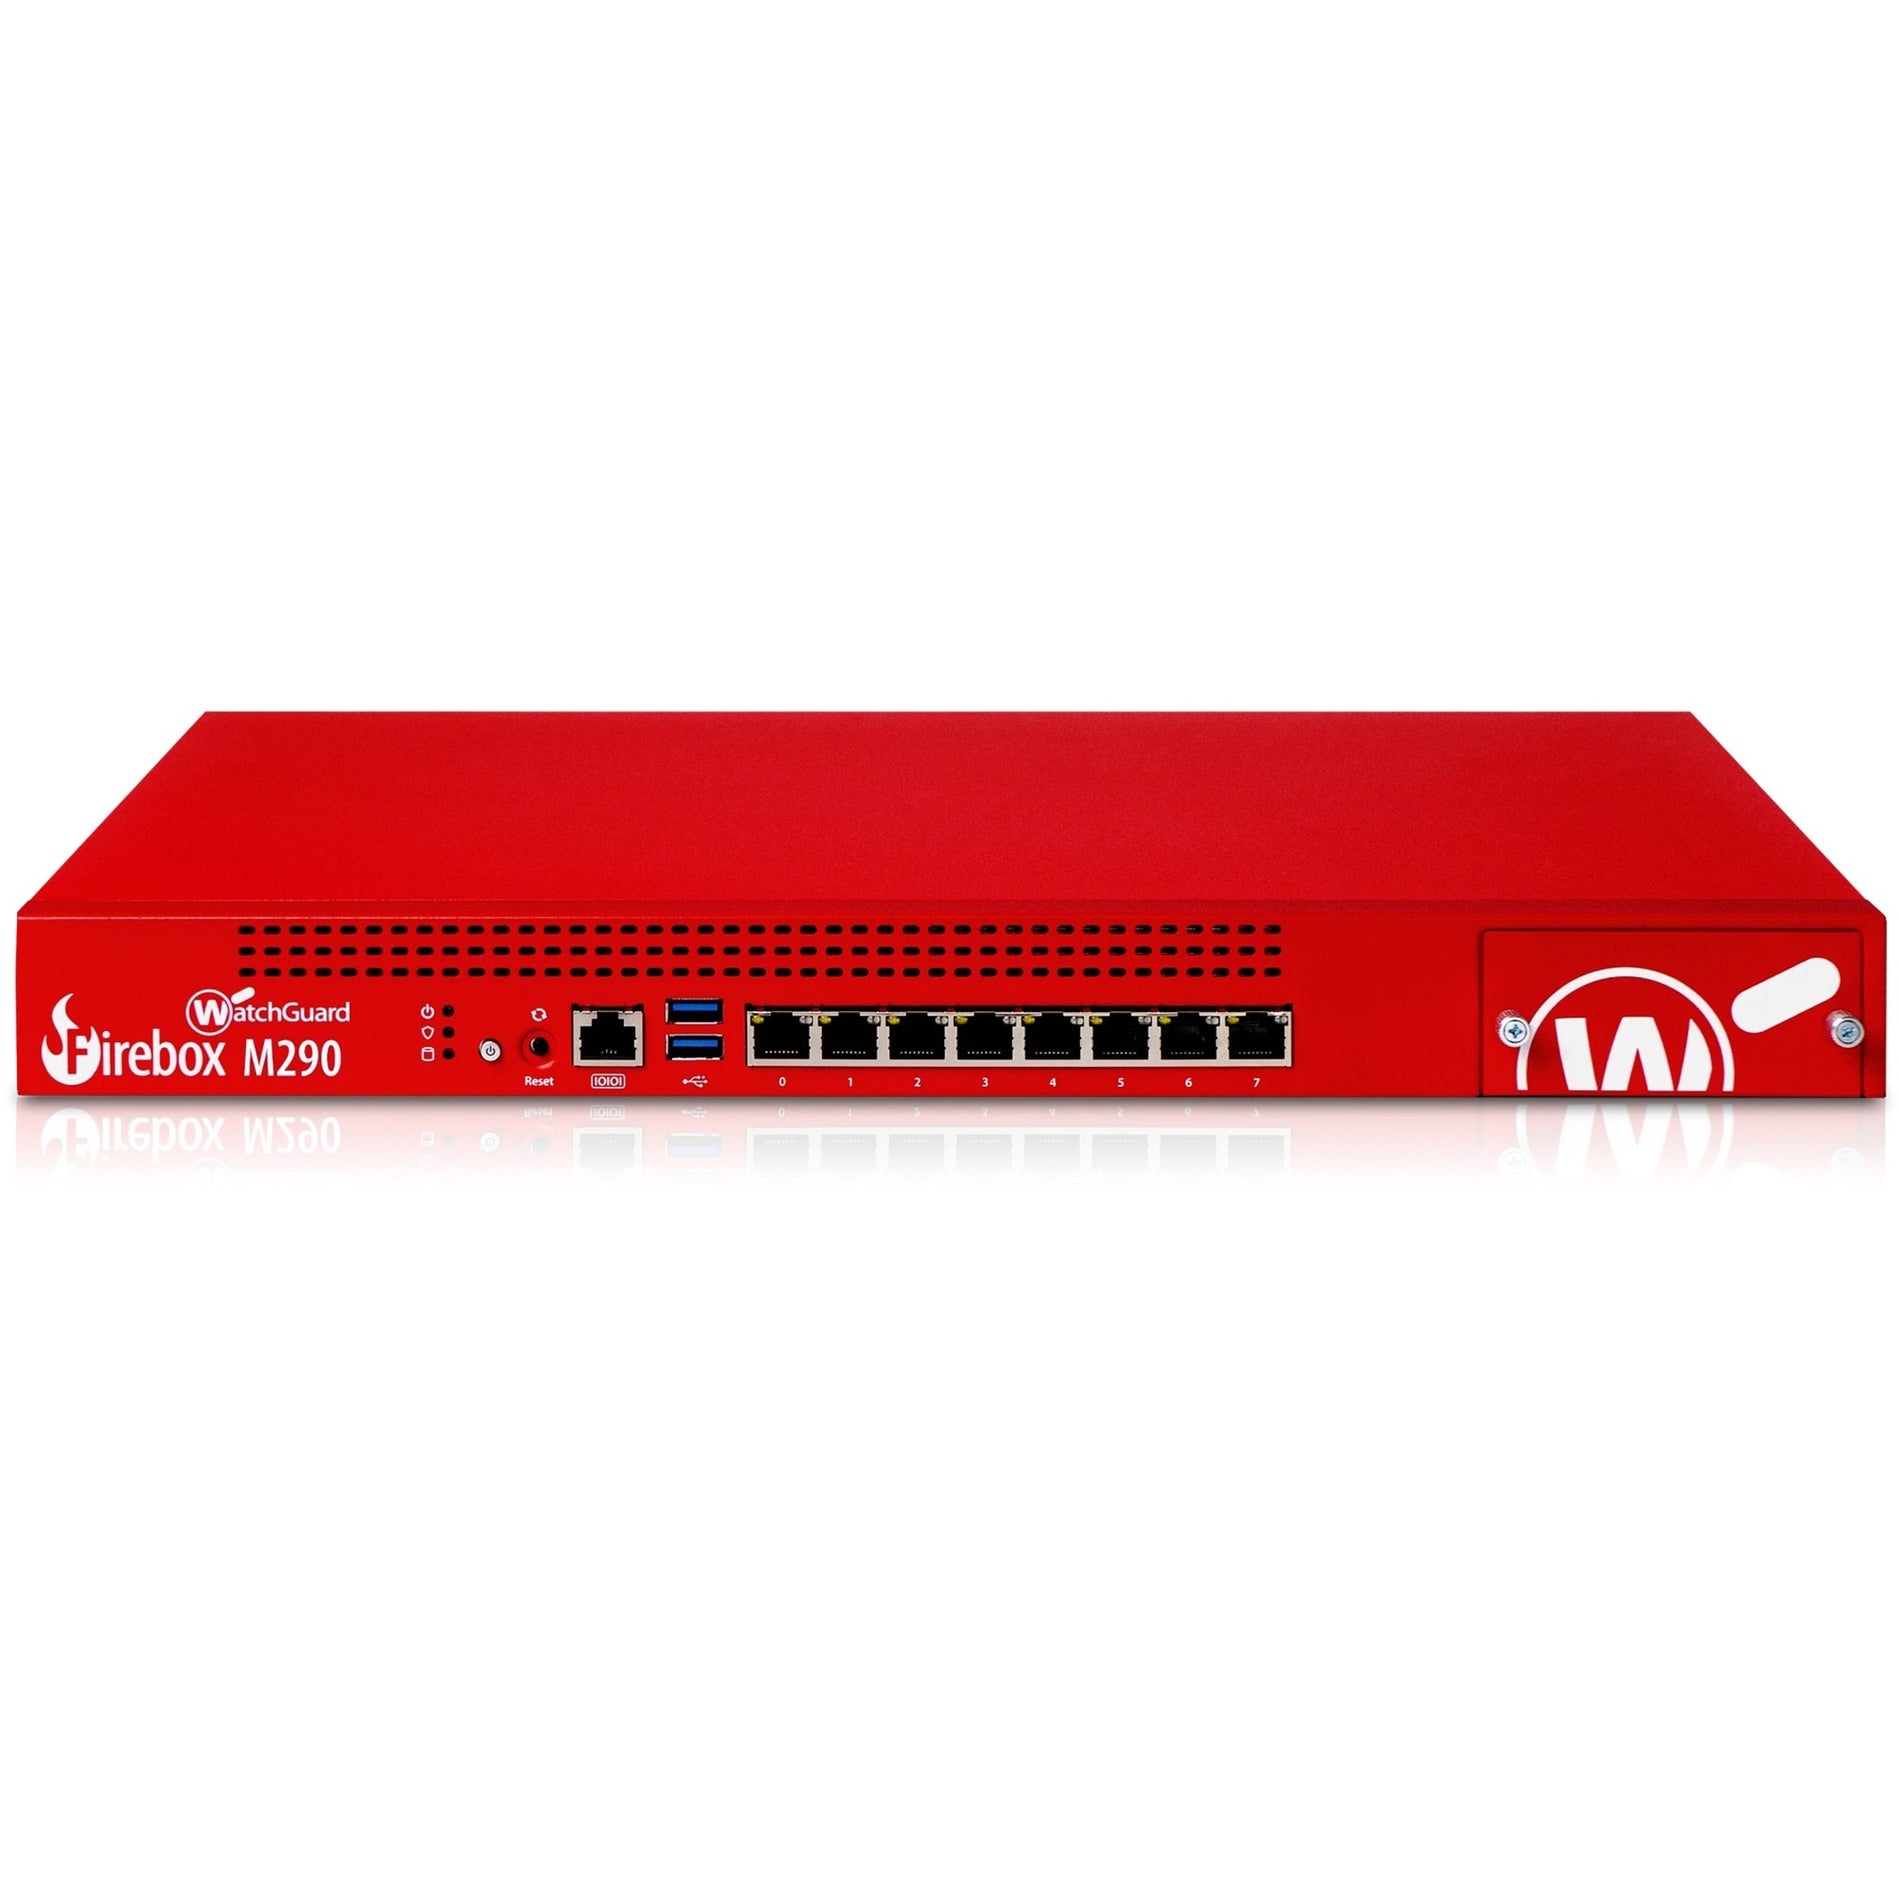 WatchGuard WGM29000803 Firebox M290 Network Security/Firewall Appliance, 8 Ports, 3-Year Total Security Suite